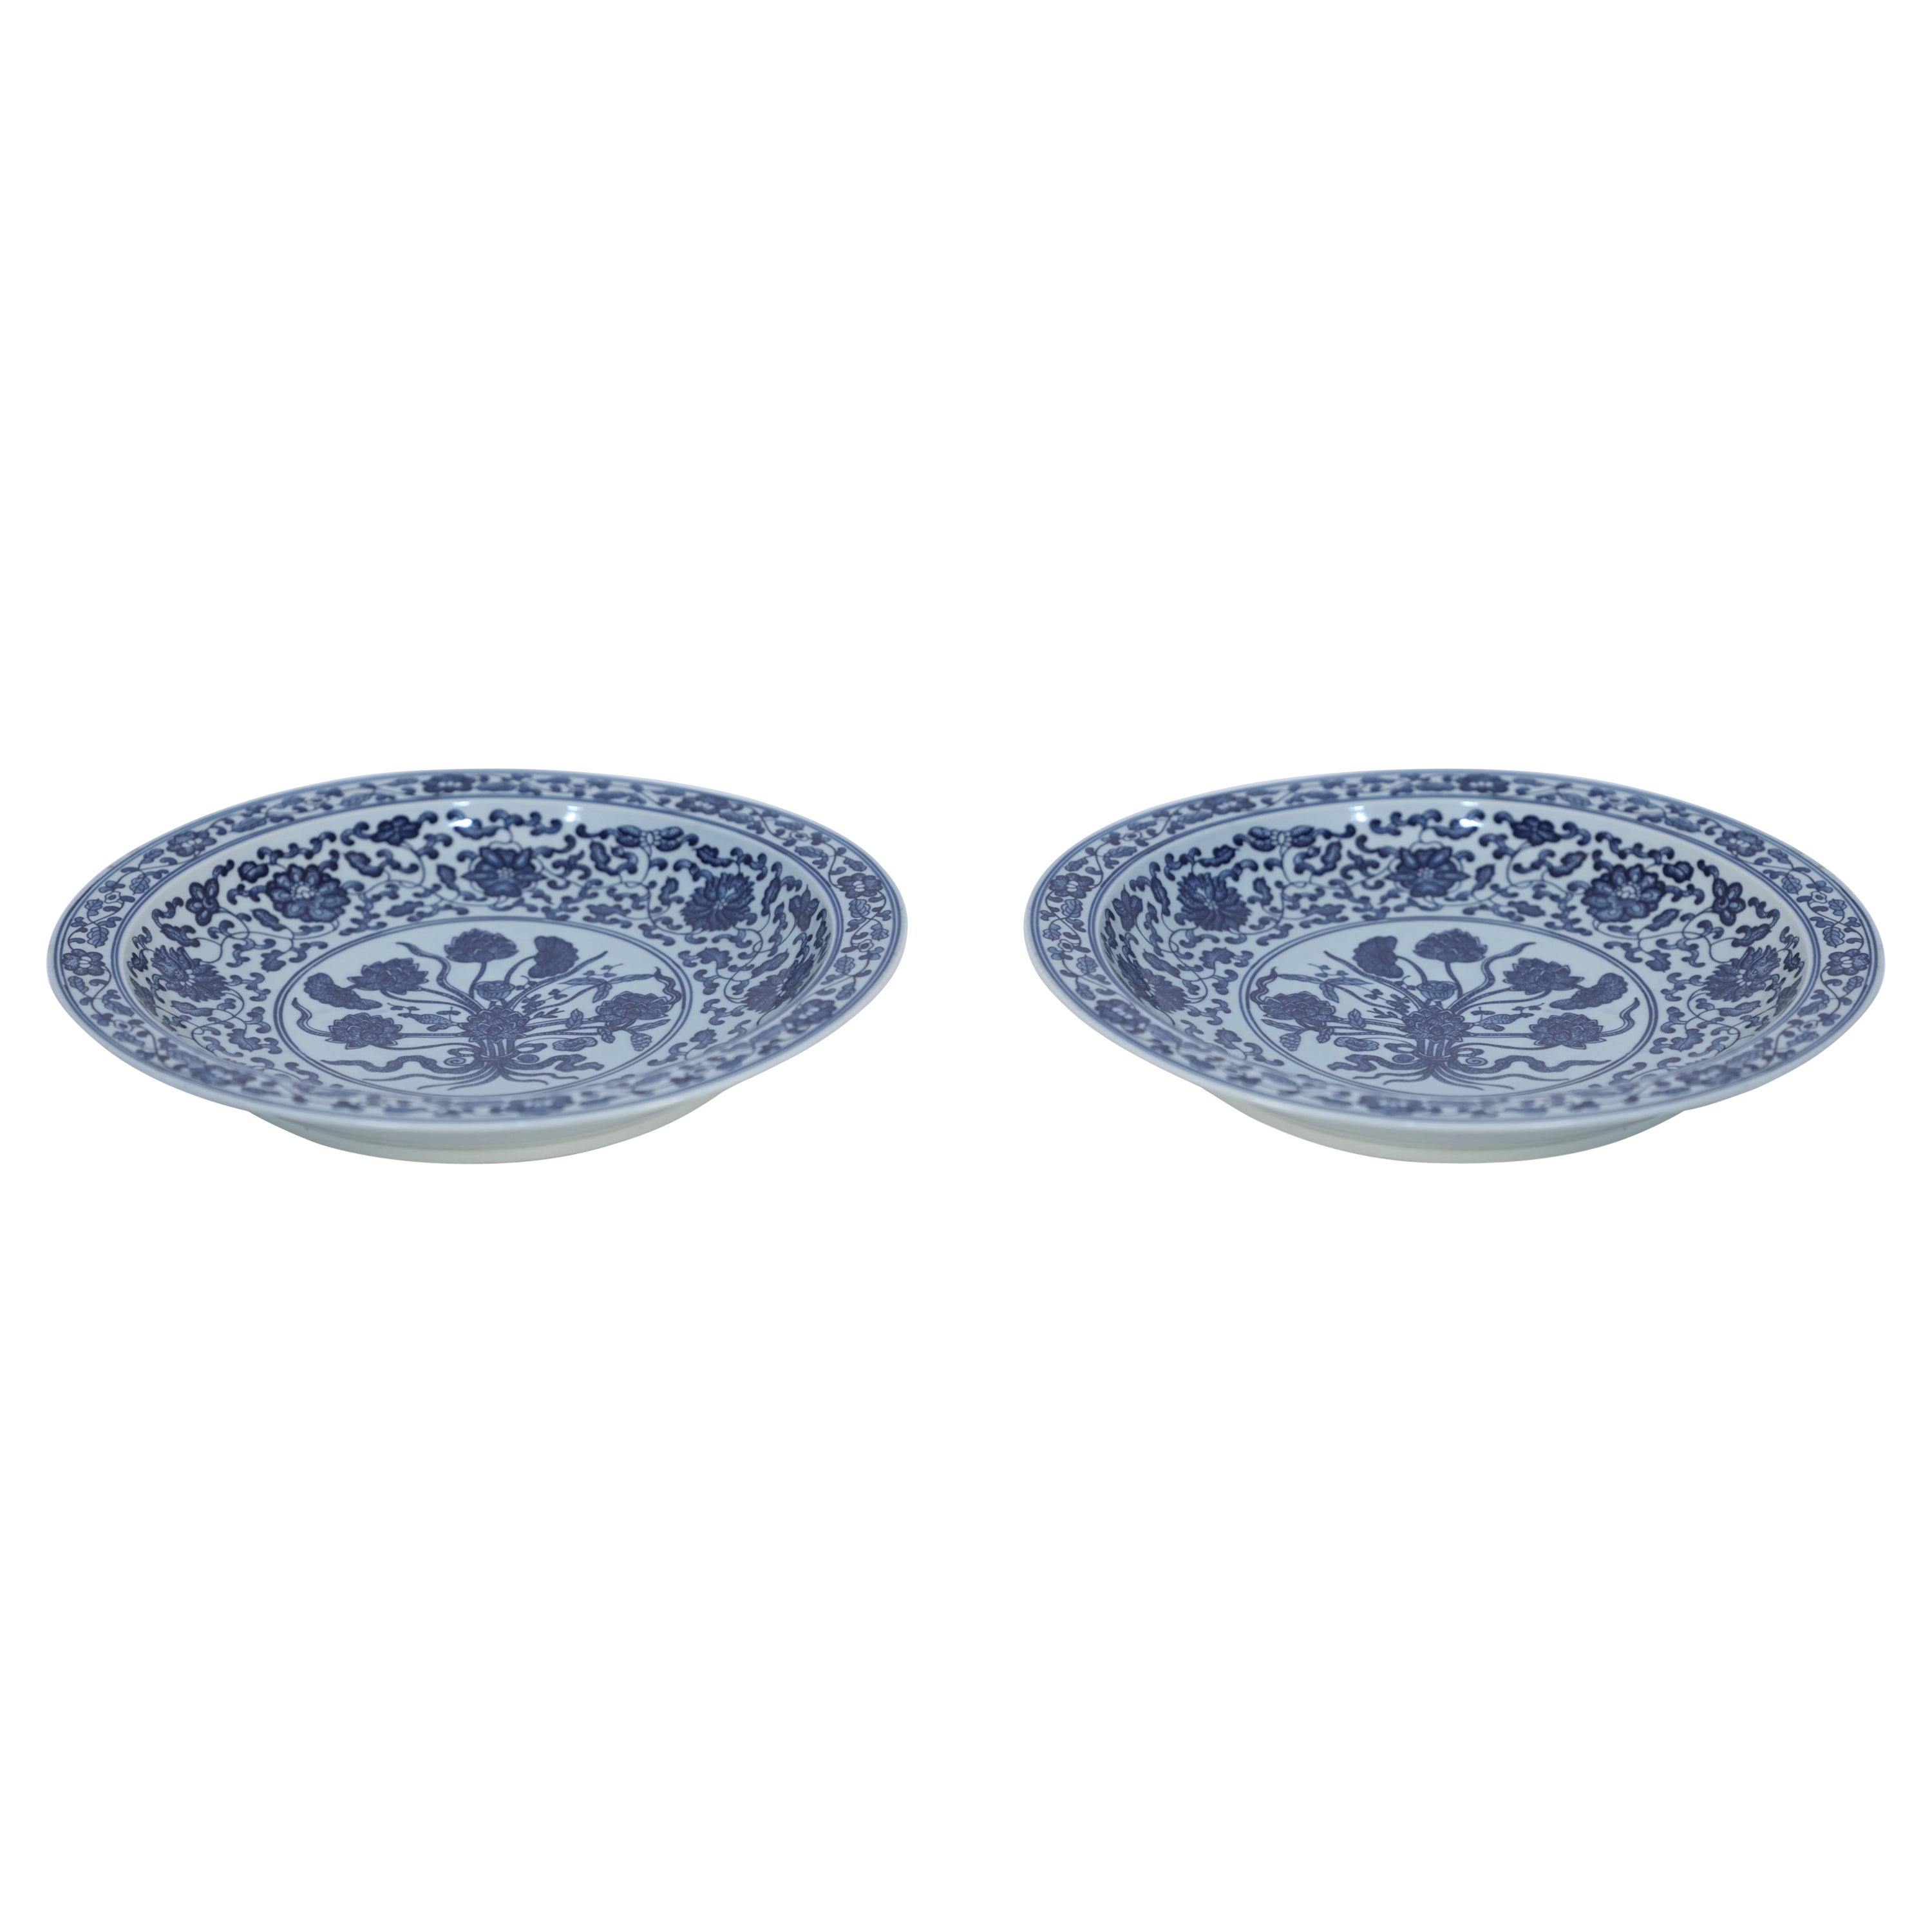 Pair of Chinese White and Blue Floral Decorative Plates For Sale